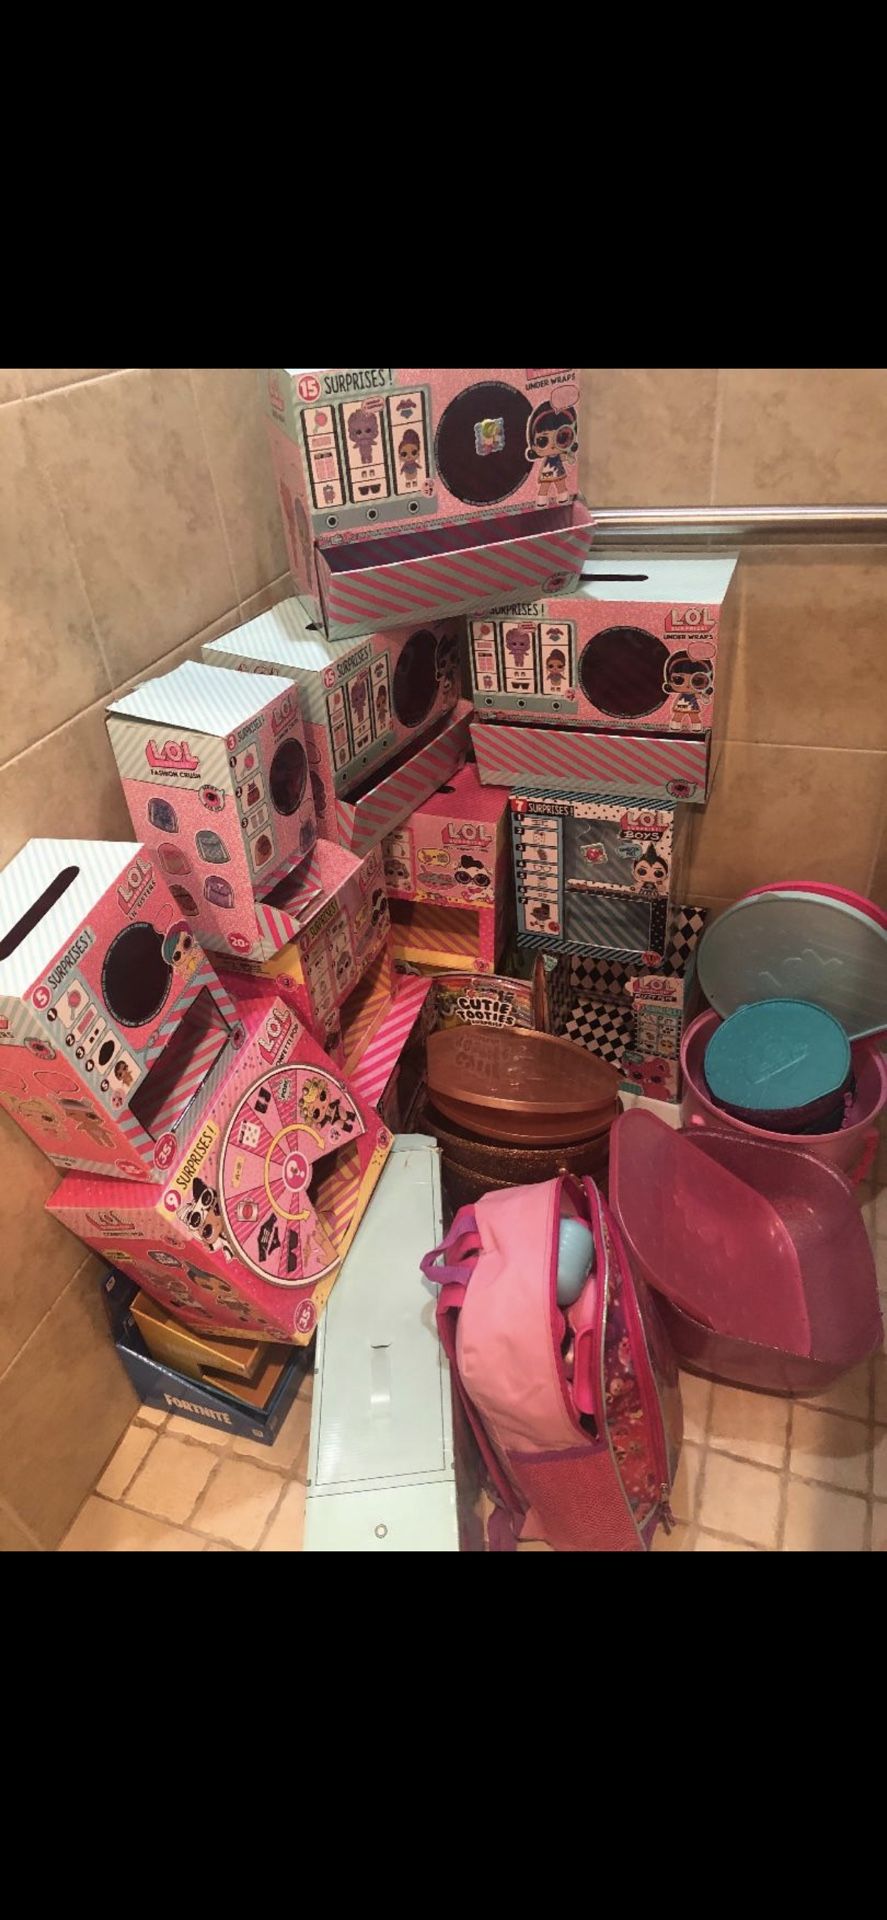 LOL Dolls Boxes And Containers and Fortnite Boxes 